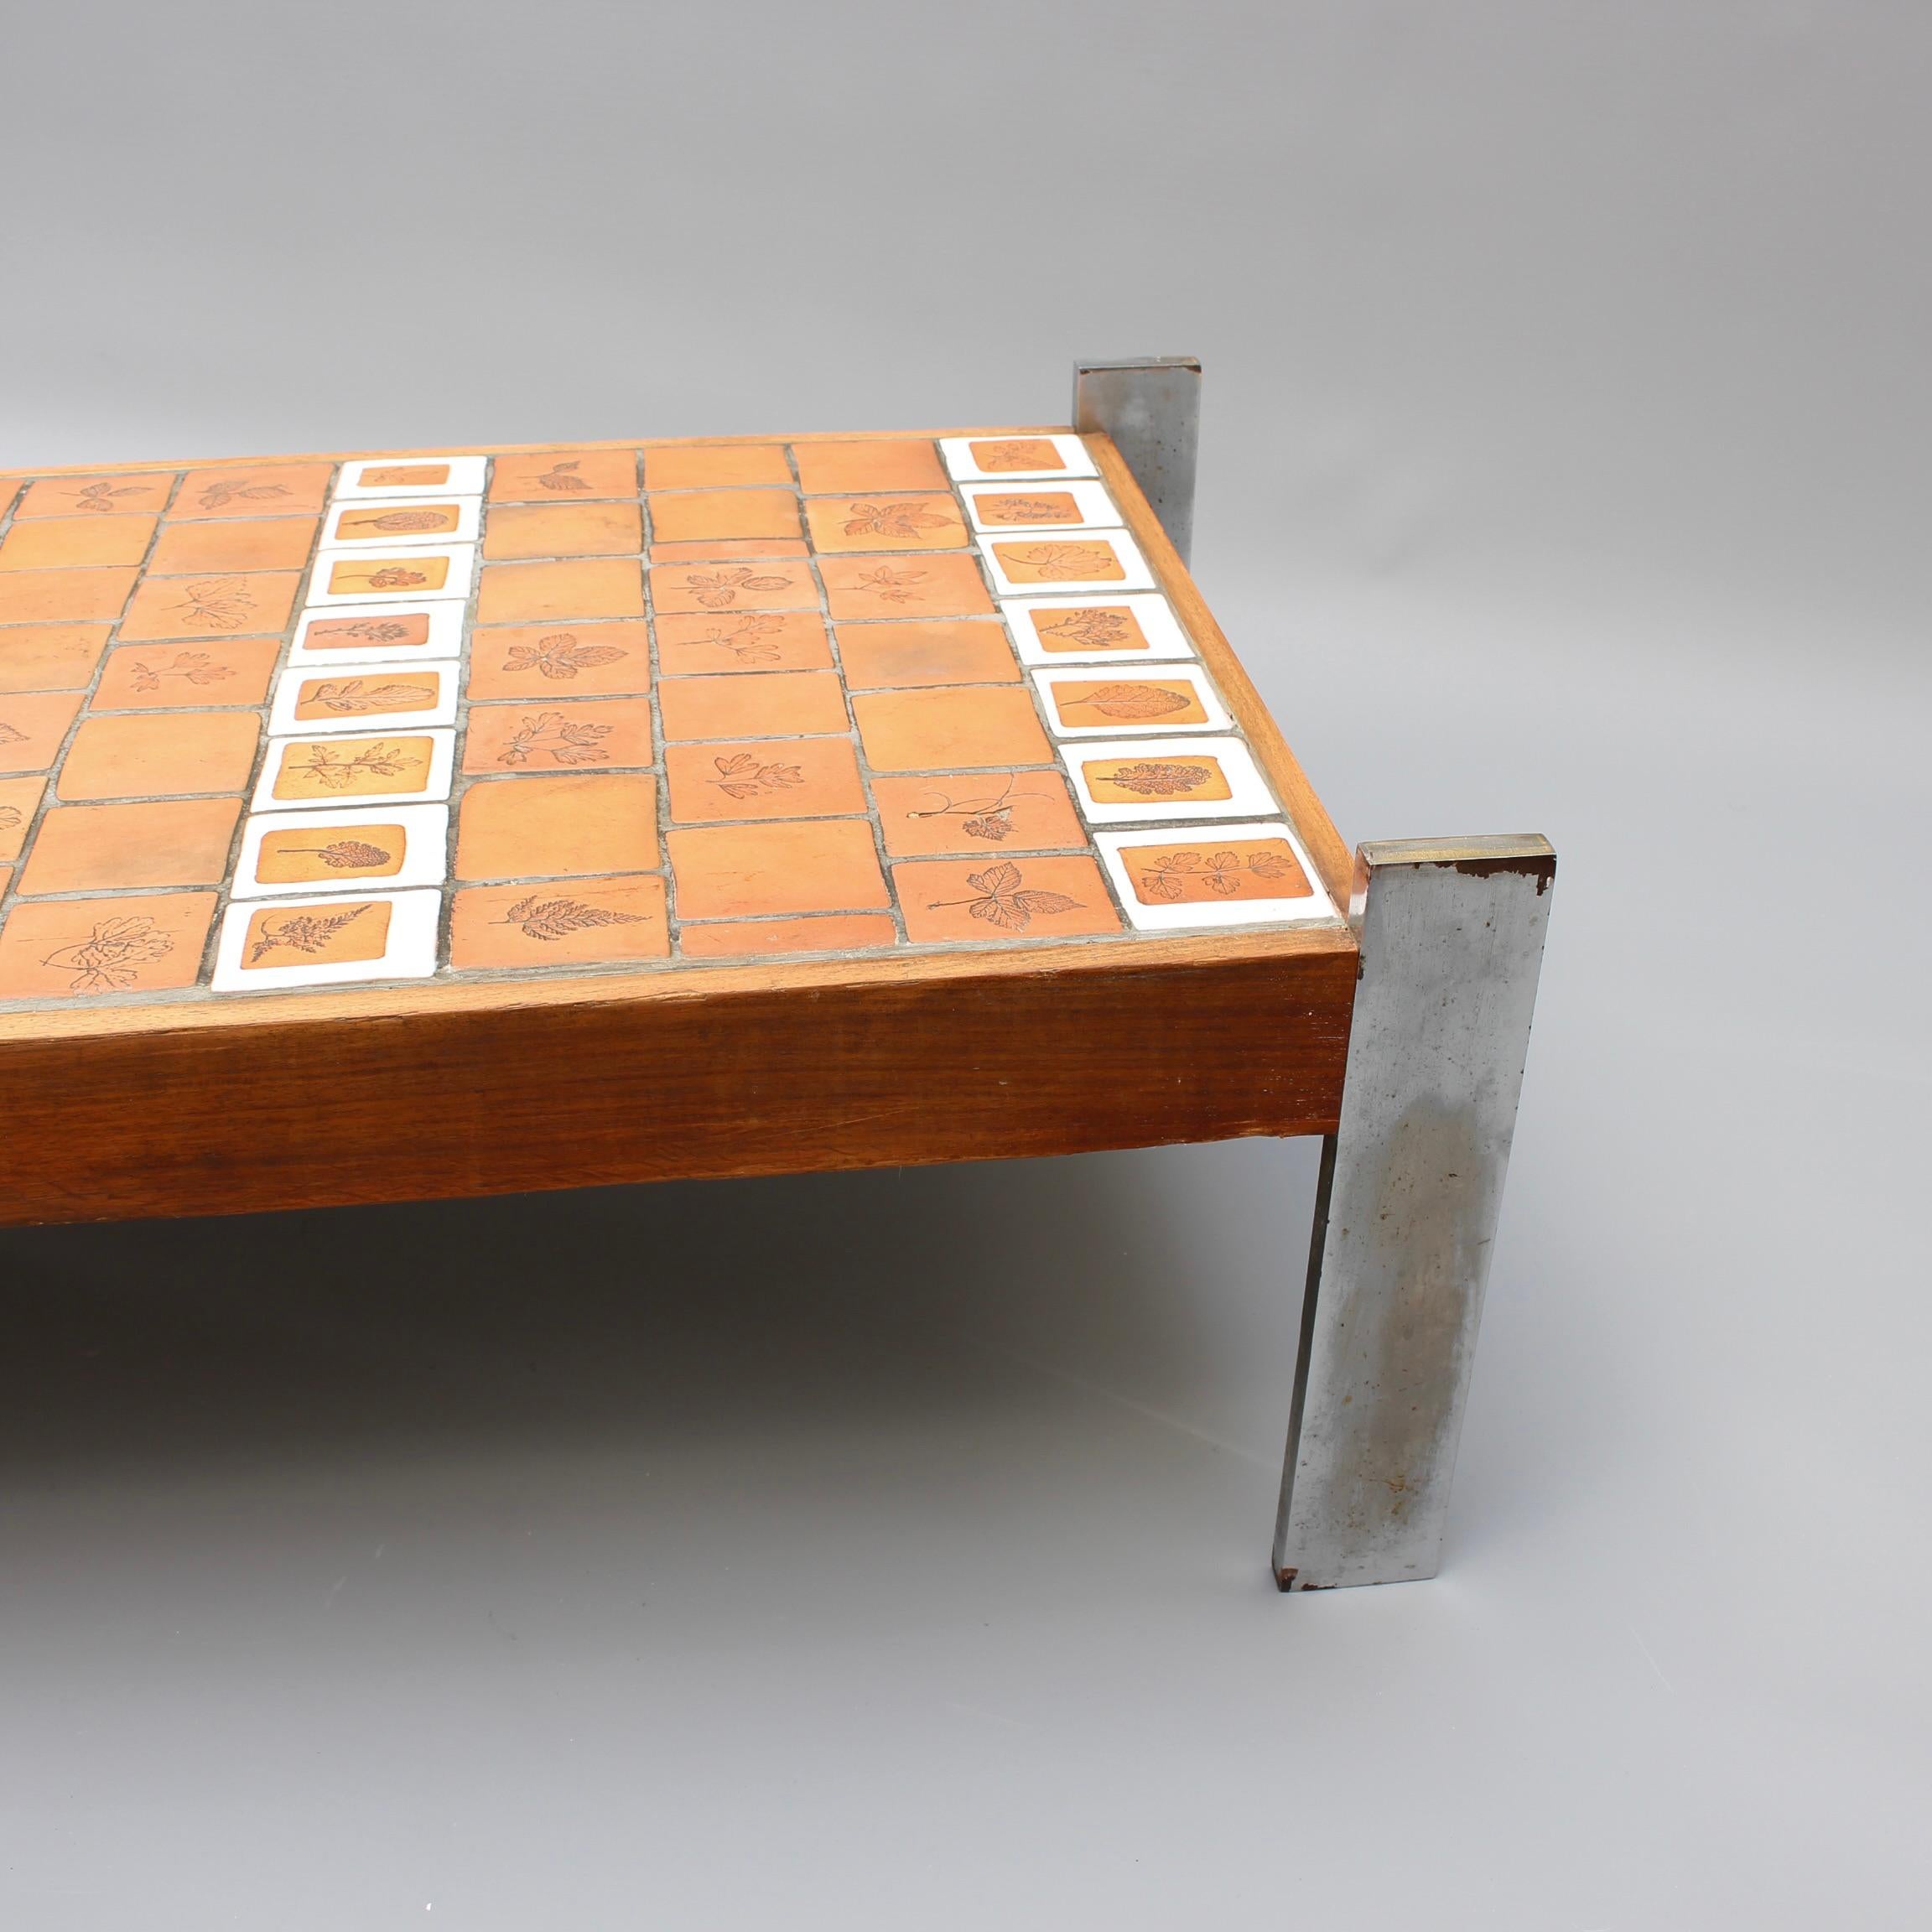 Vintage French Coffee Table with Leaf Motif Tiles by Roger Capron (circa 1970s) For Sale 1